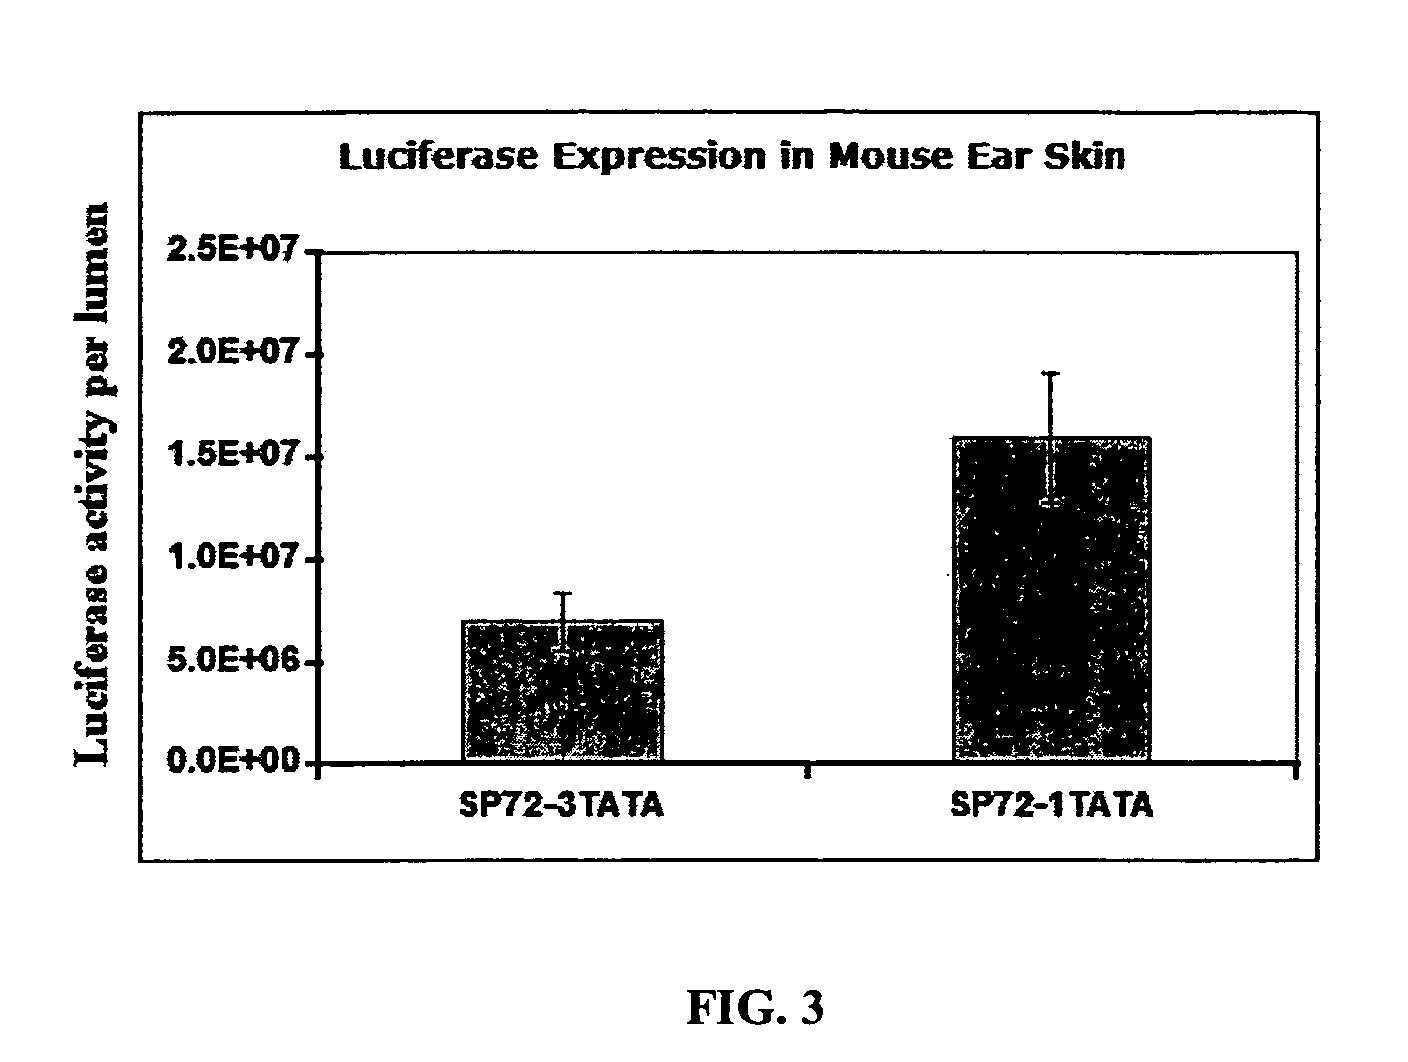 Rationally designed and chemically synthesized promoter for genetic vaccine and gene therapy